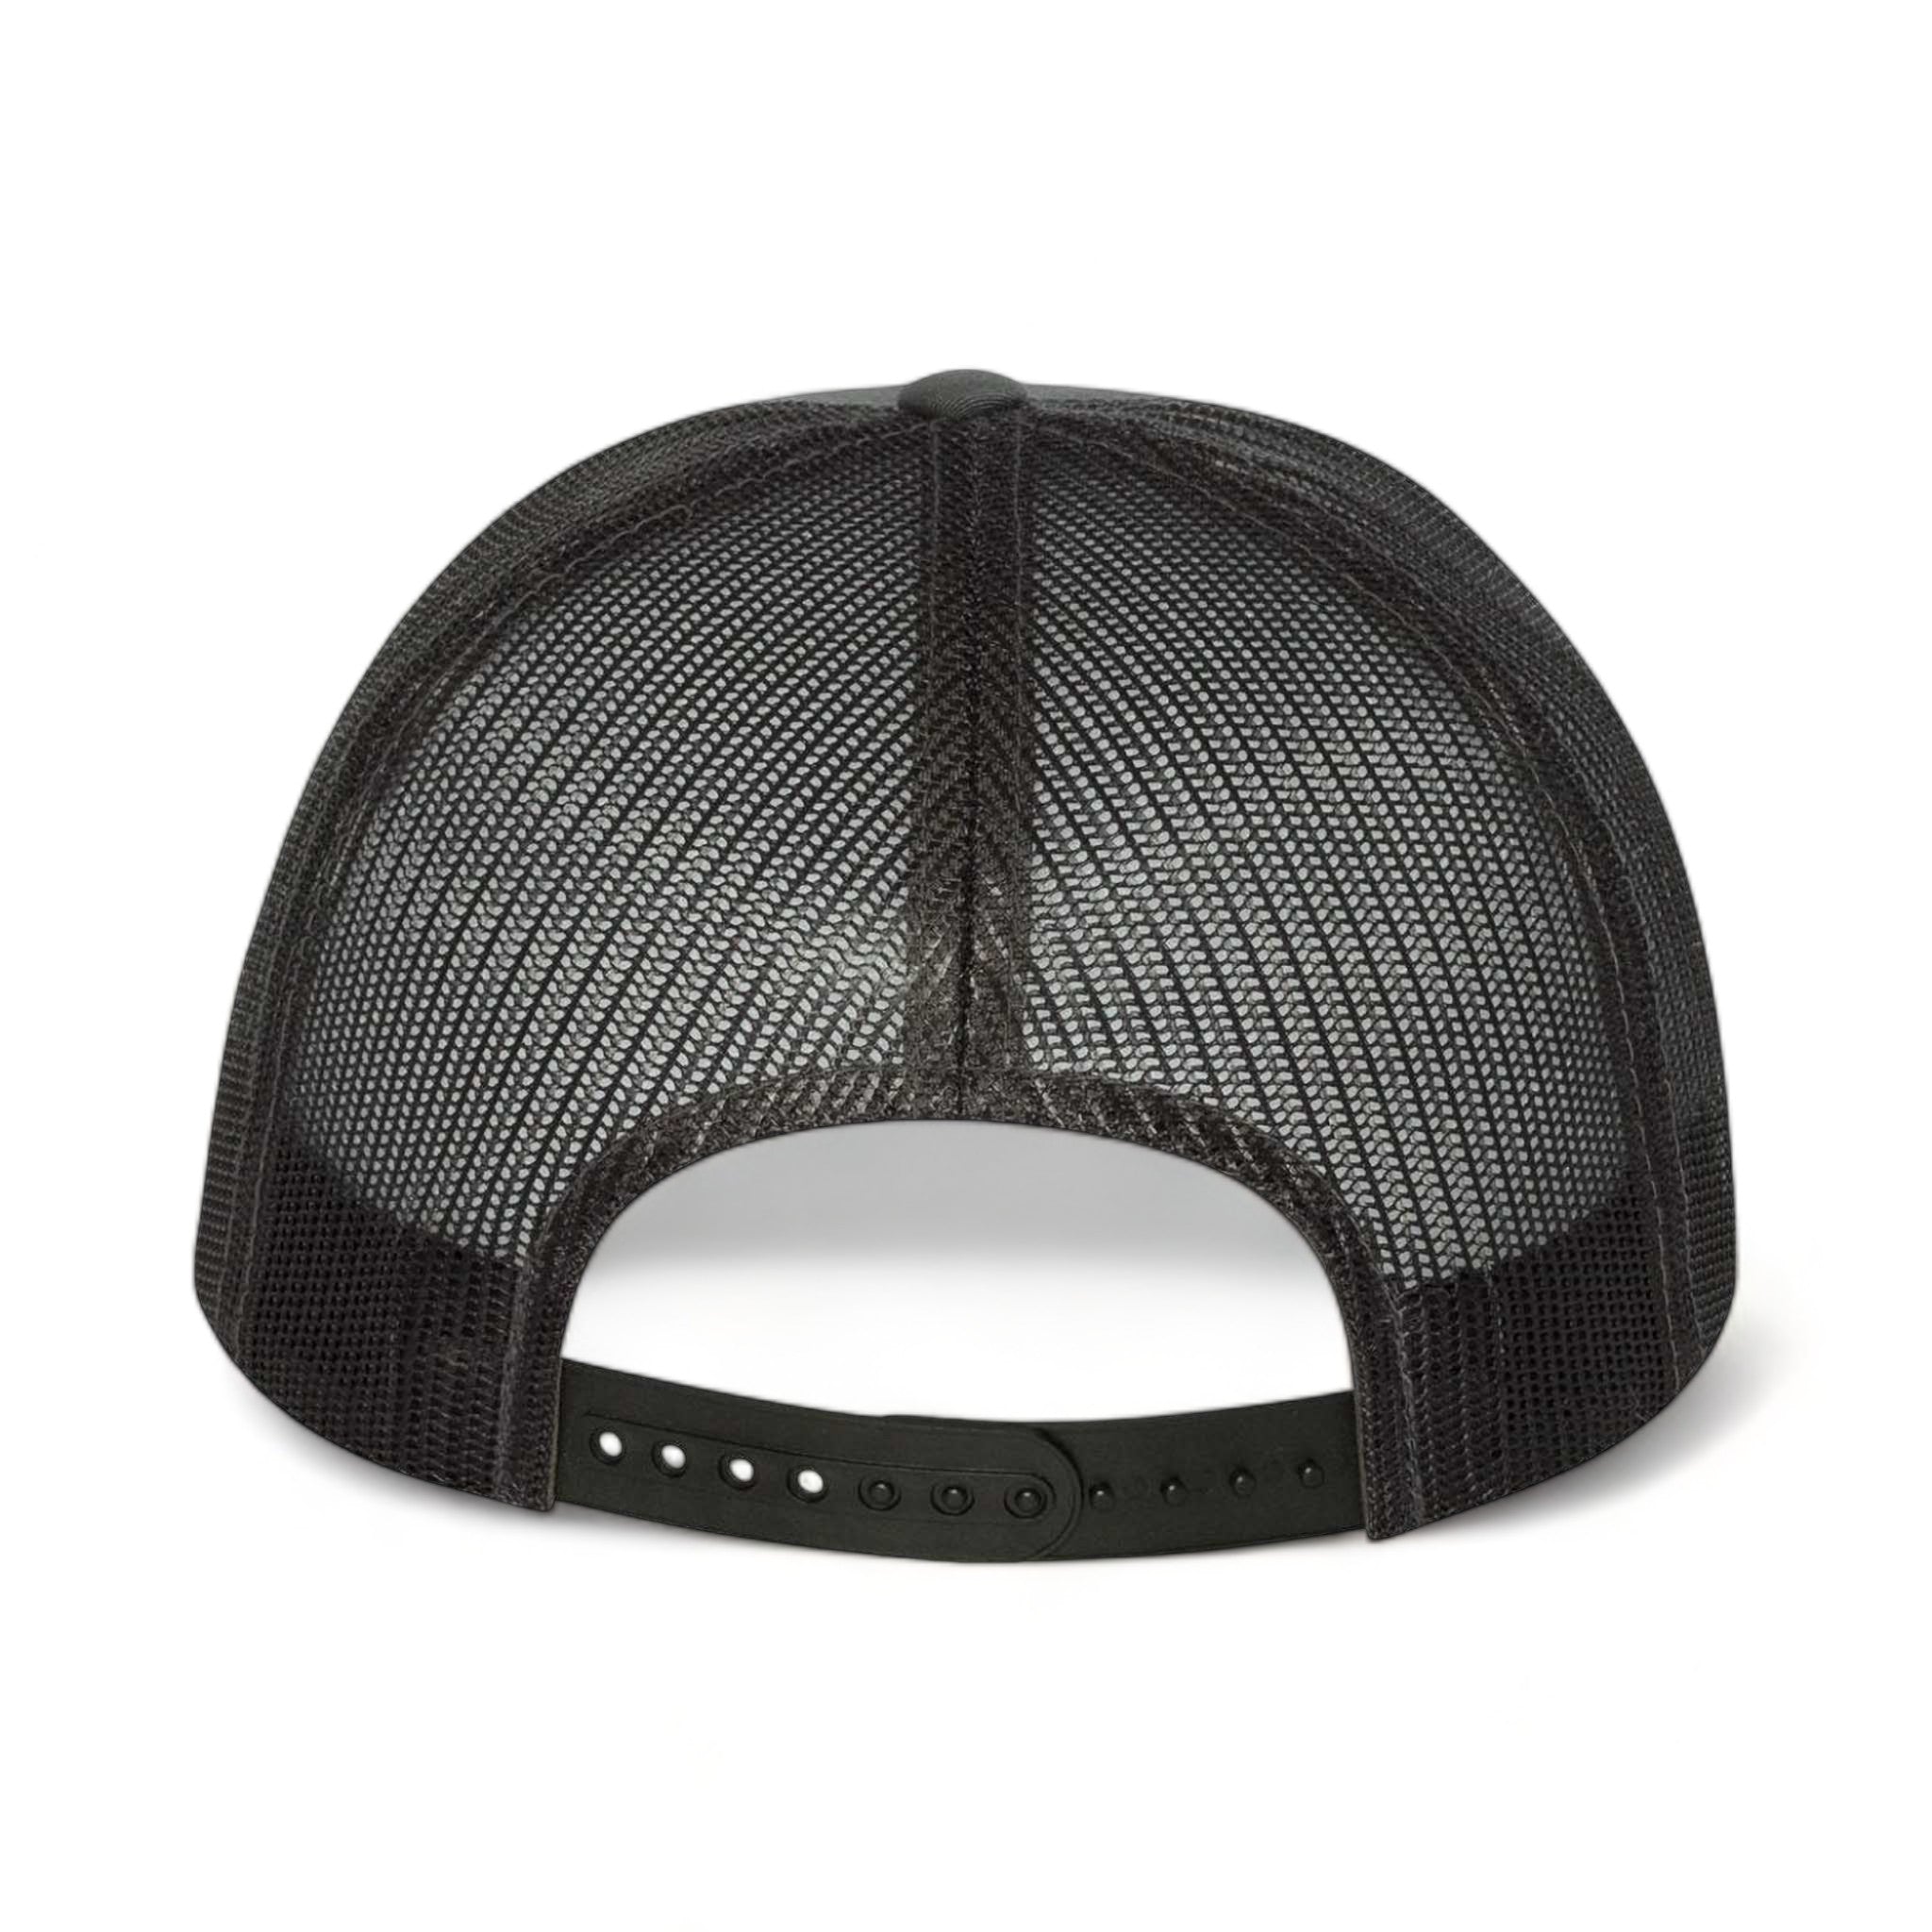 Back view of YP Classics 6006 custom hat in charcoal